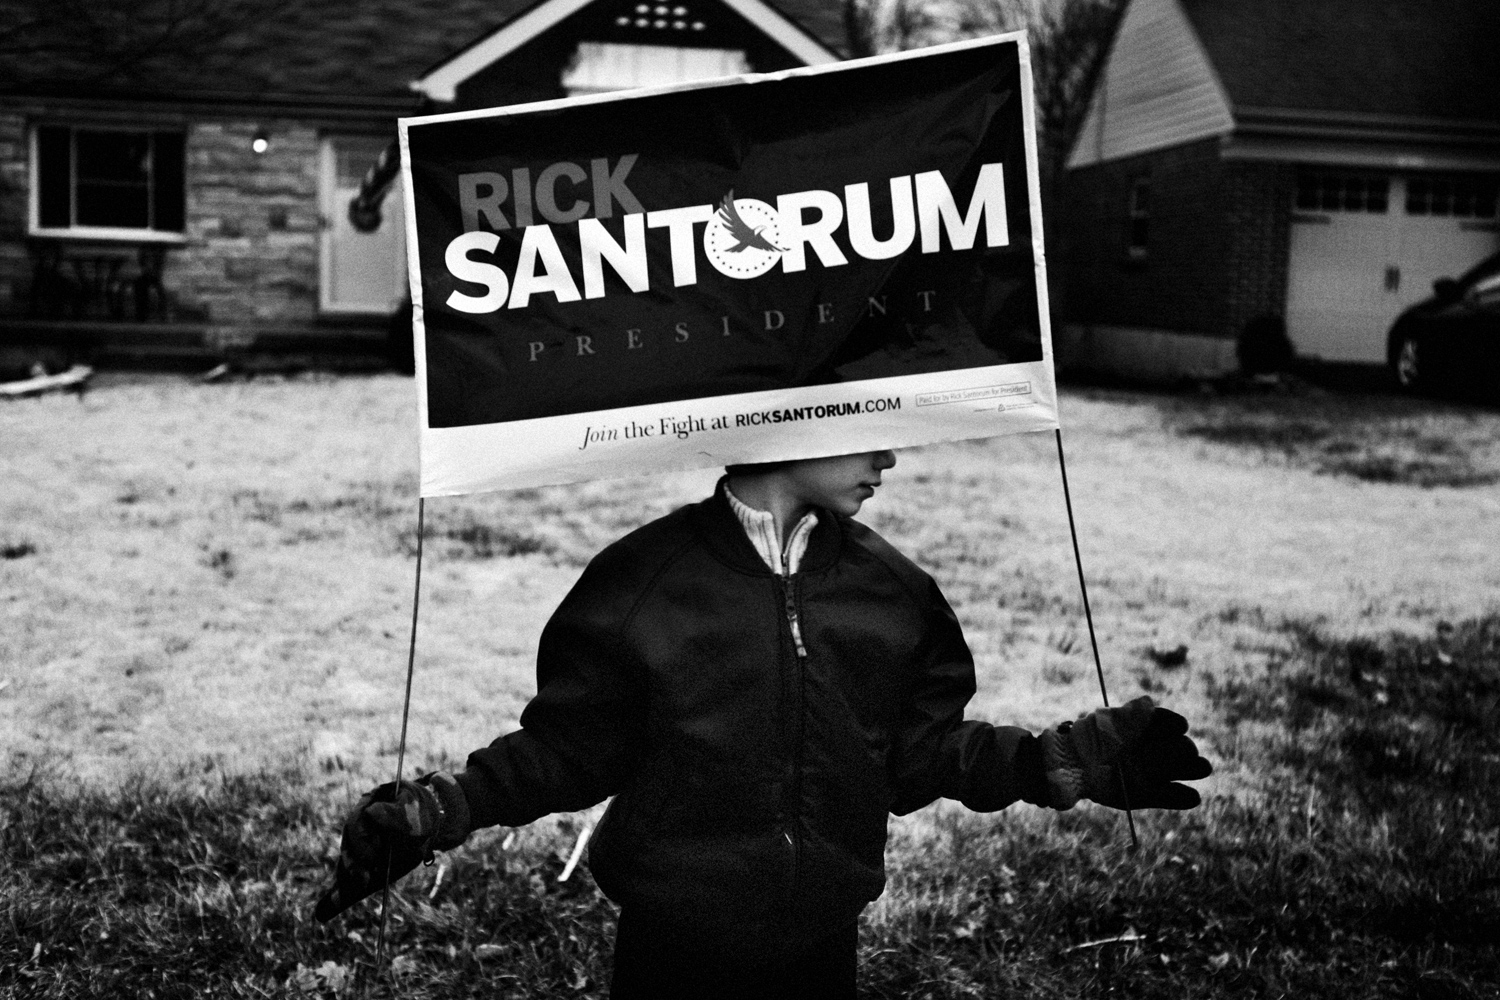 March 4, 2012.  A young volunteer for the Rick Santorum campaign holds a sign in front of St. Gertrude Church in Mason, Ohio.